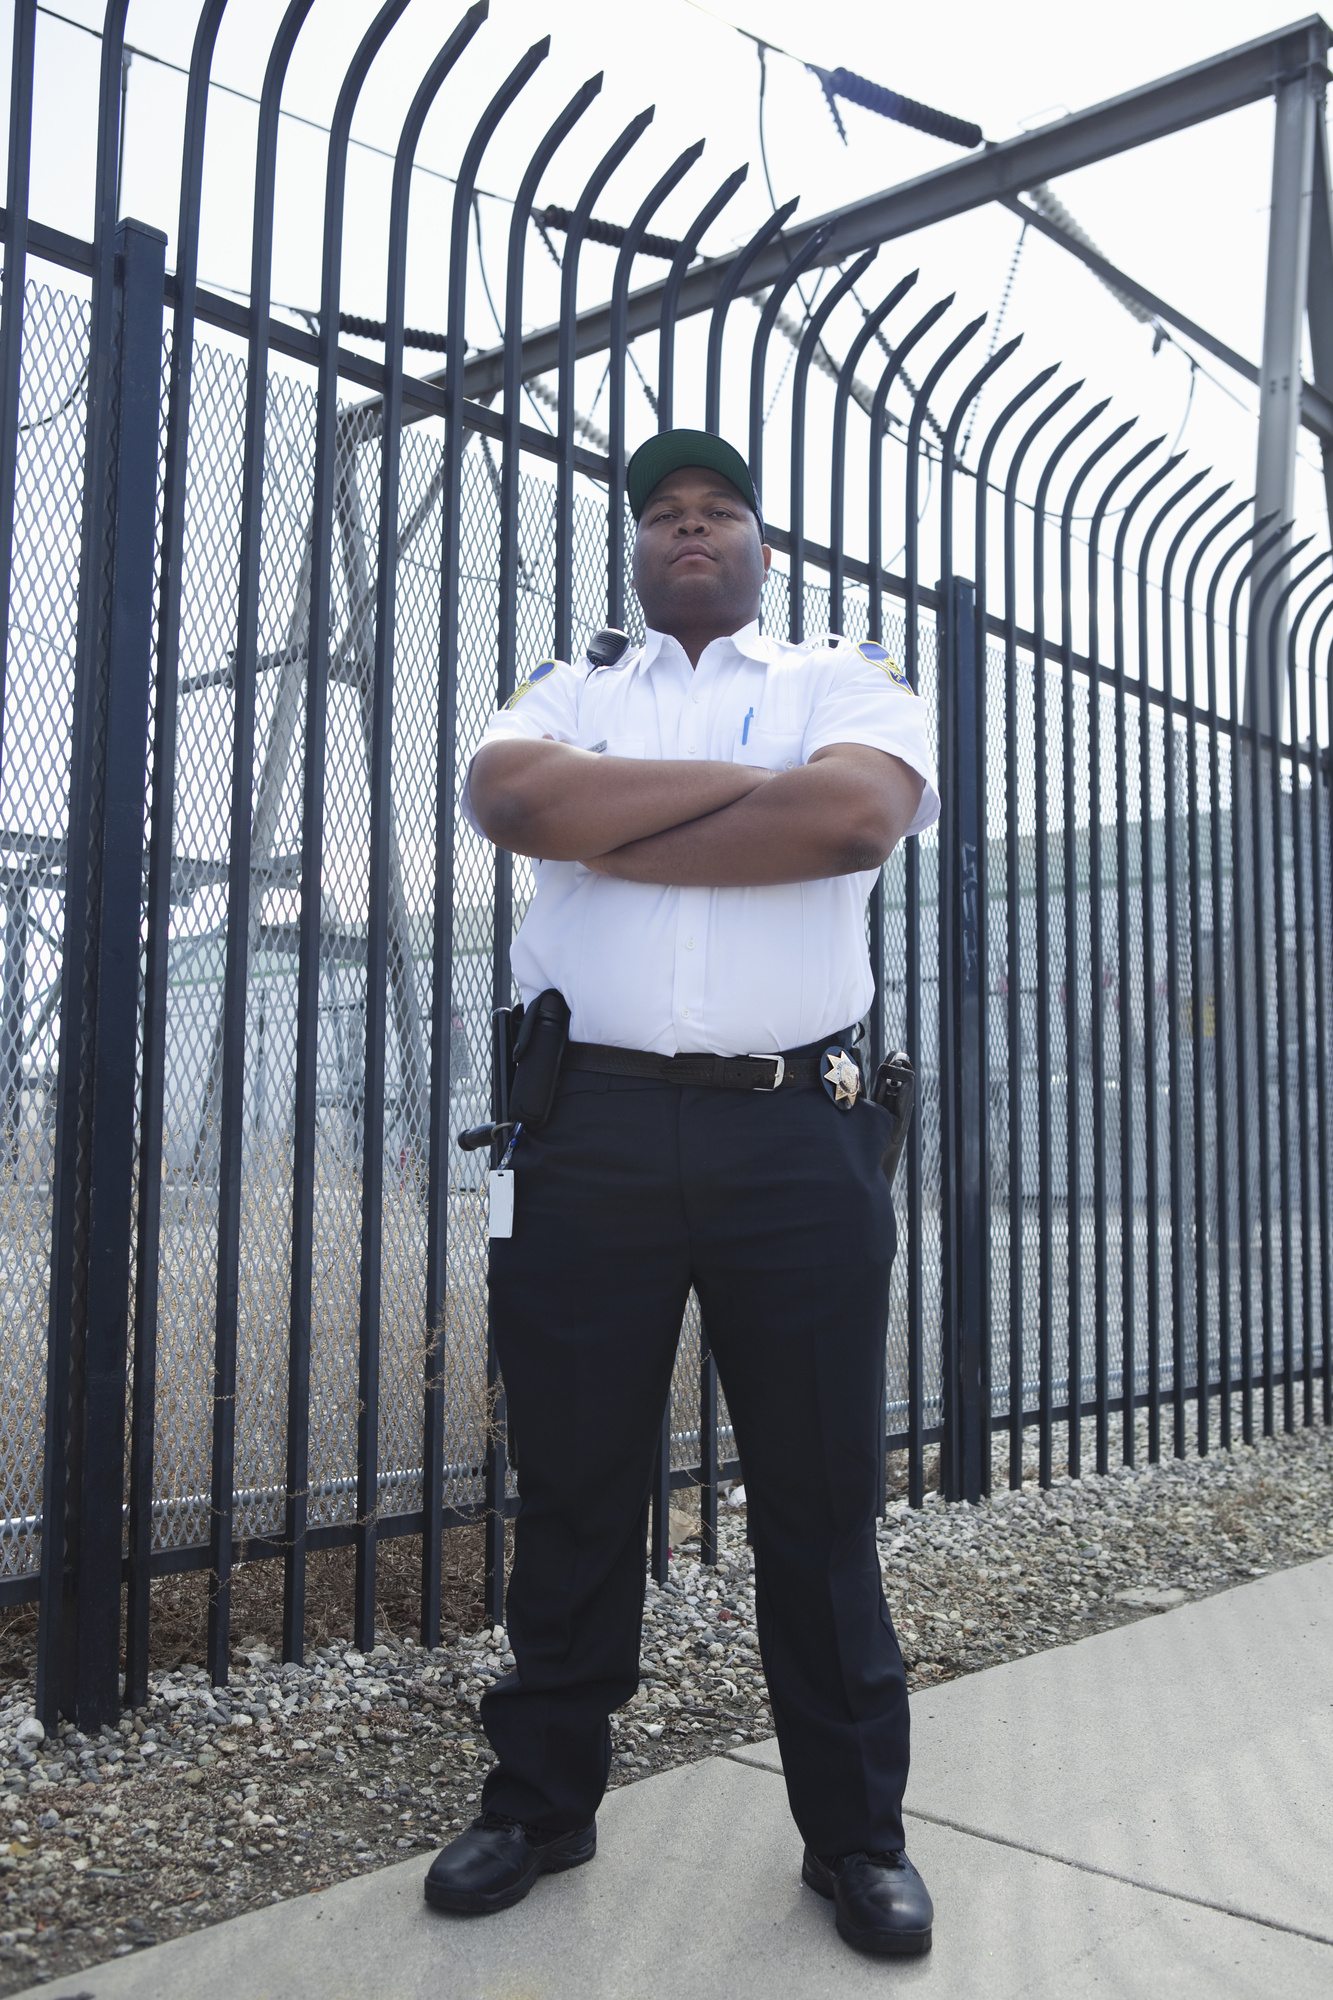 9 Primary Responsibilities of a Security Guard | Security Industry News